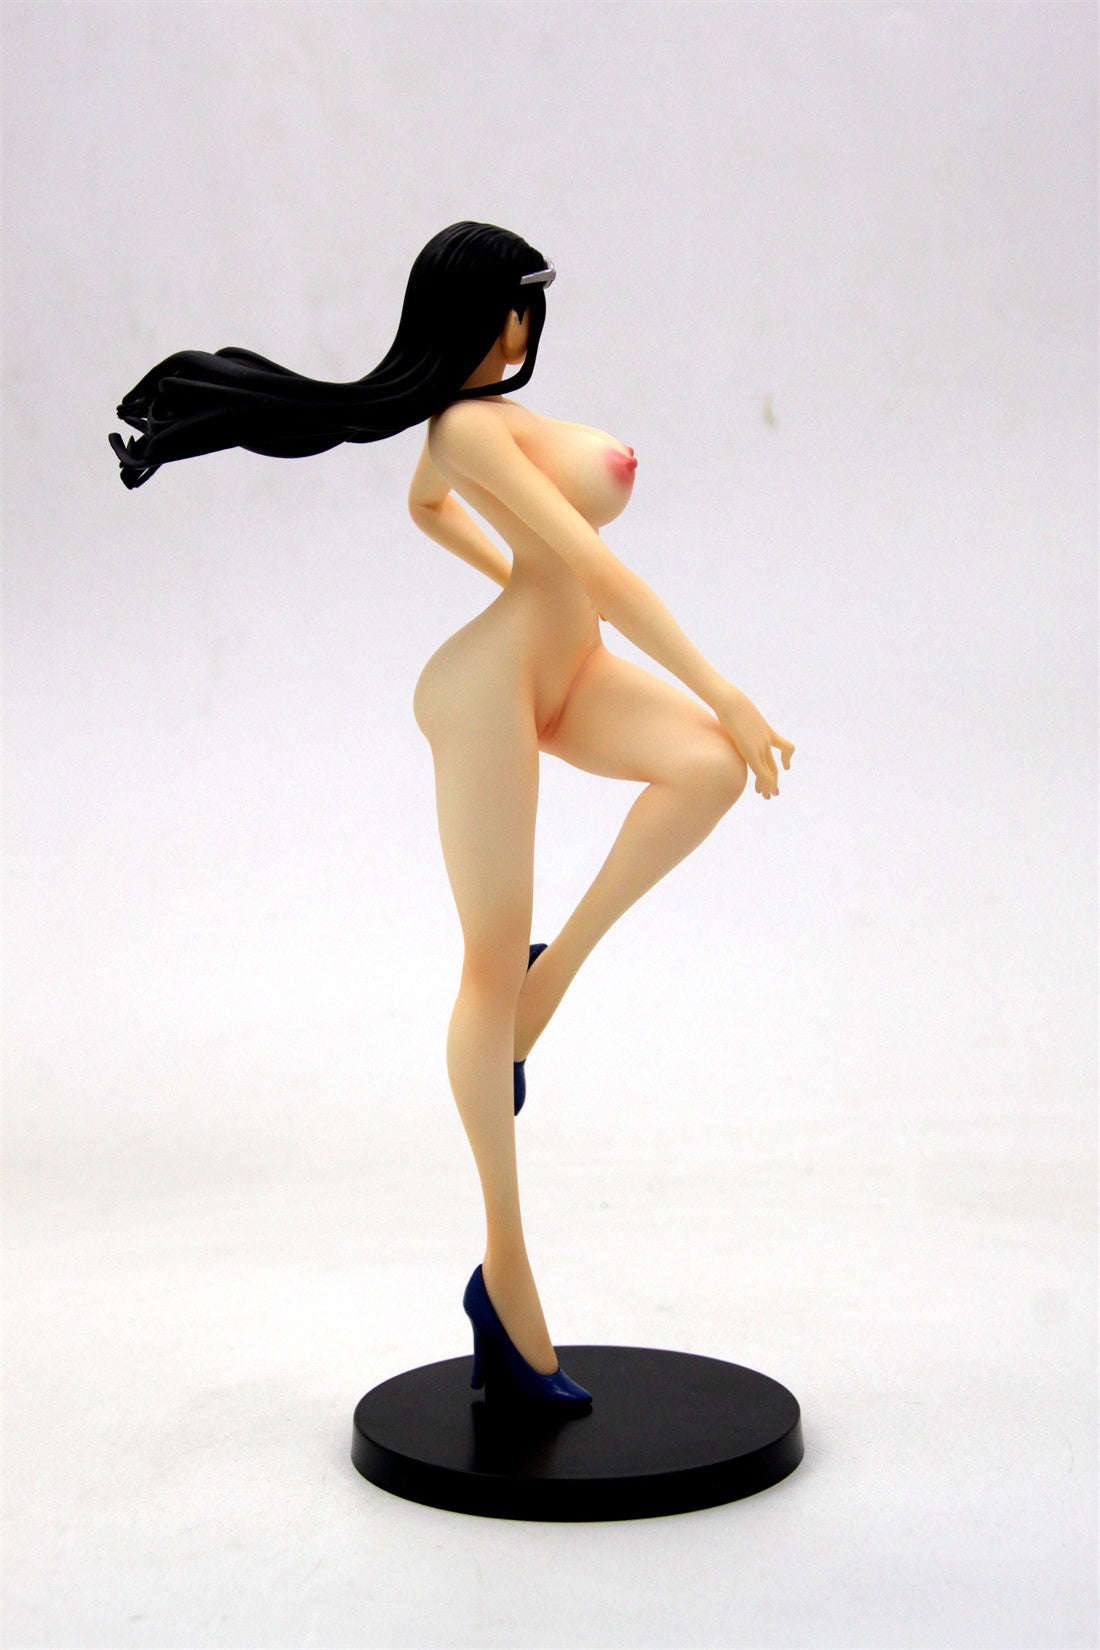 One Piece Nico Robin 1/6 collectible action figures naked anime figures